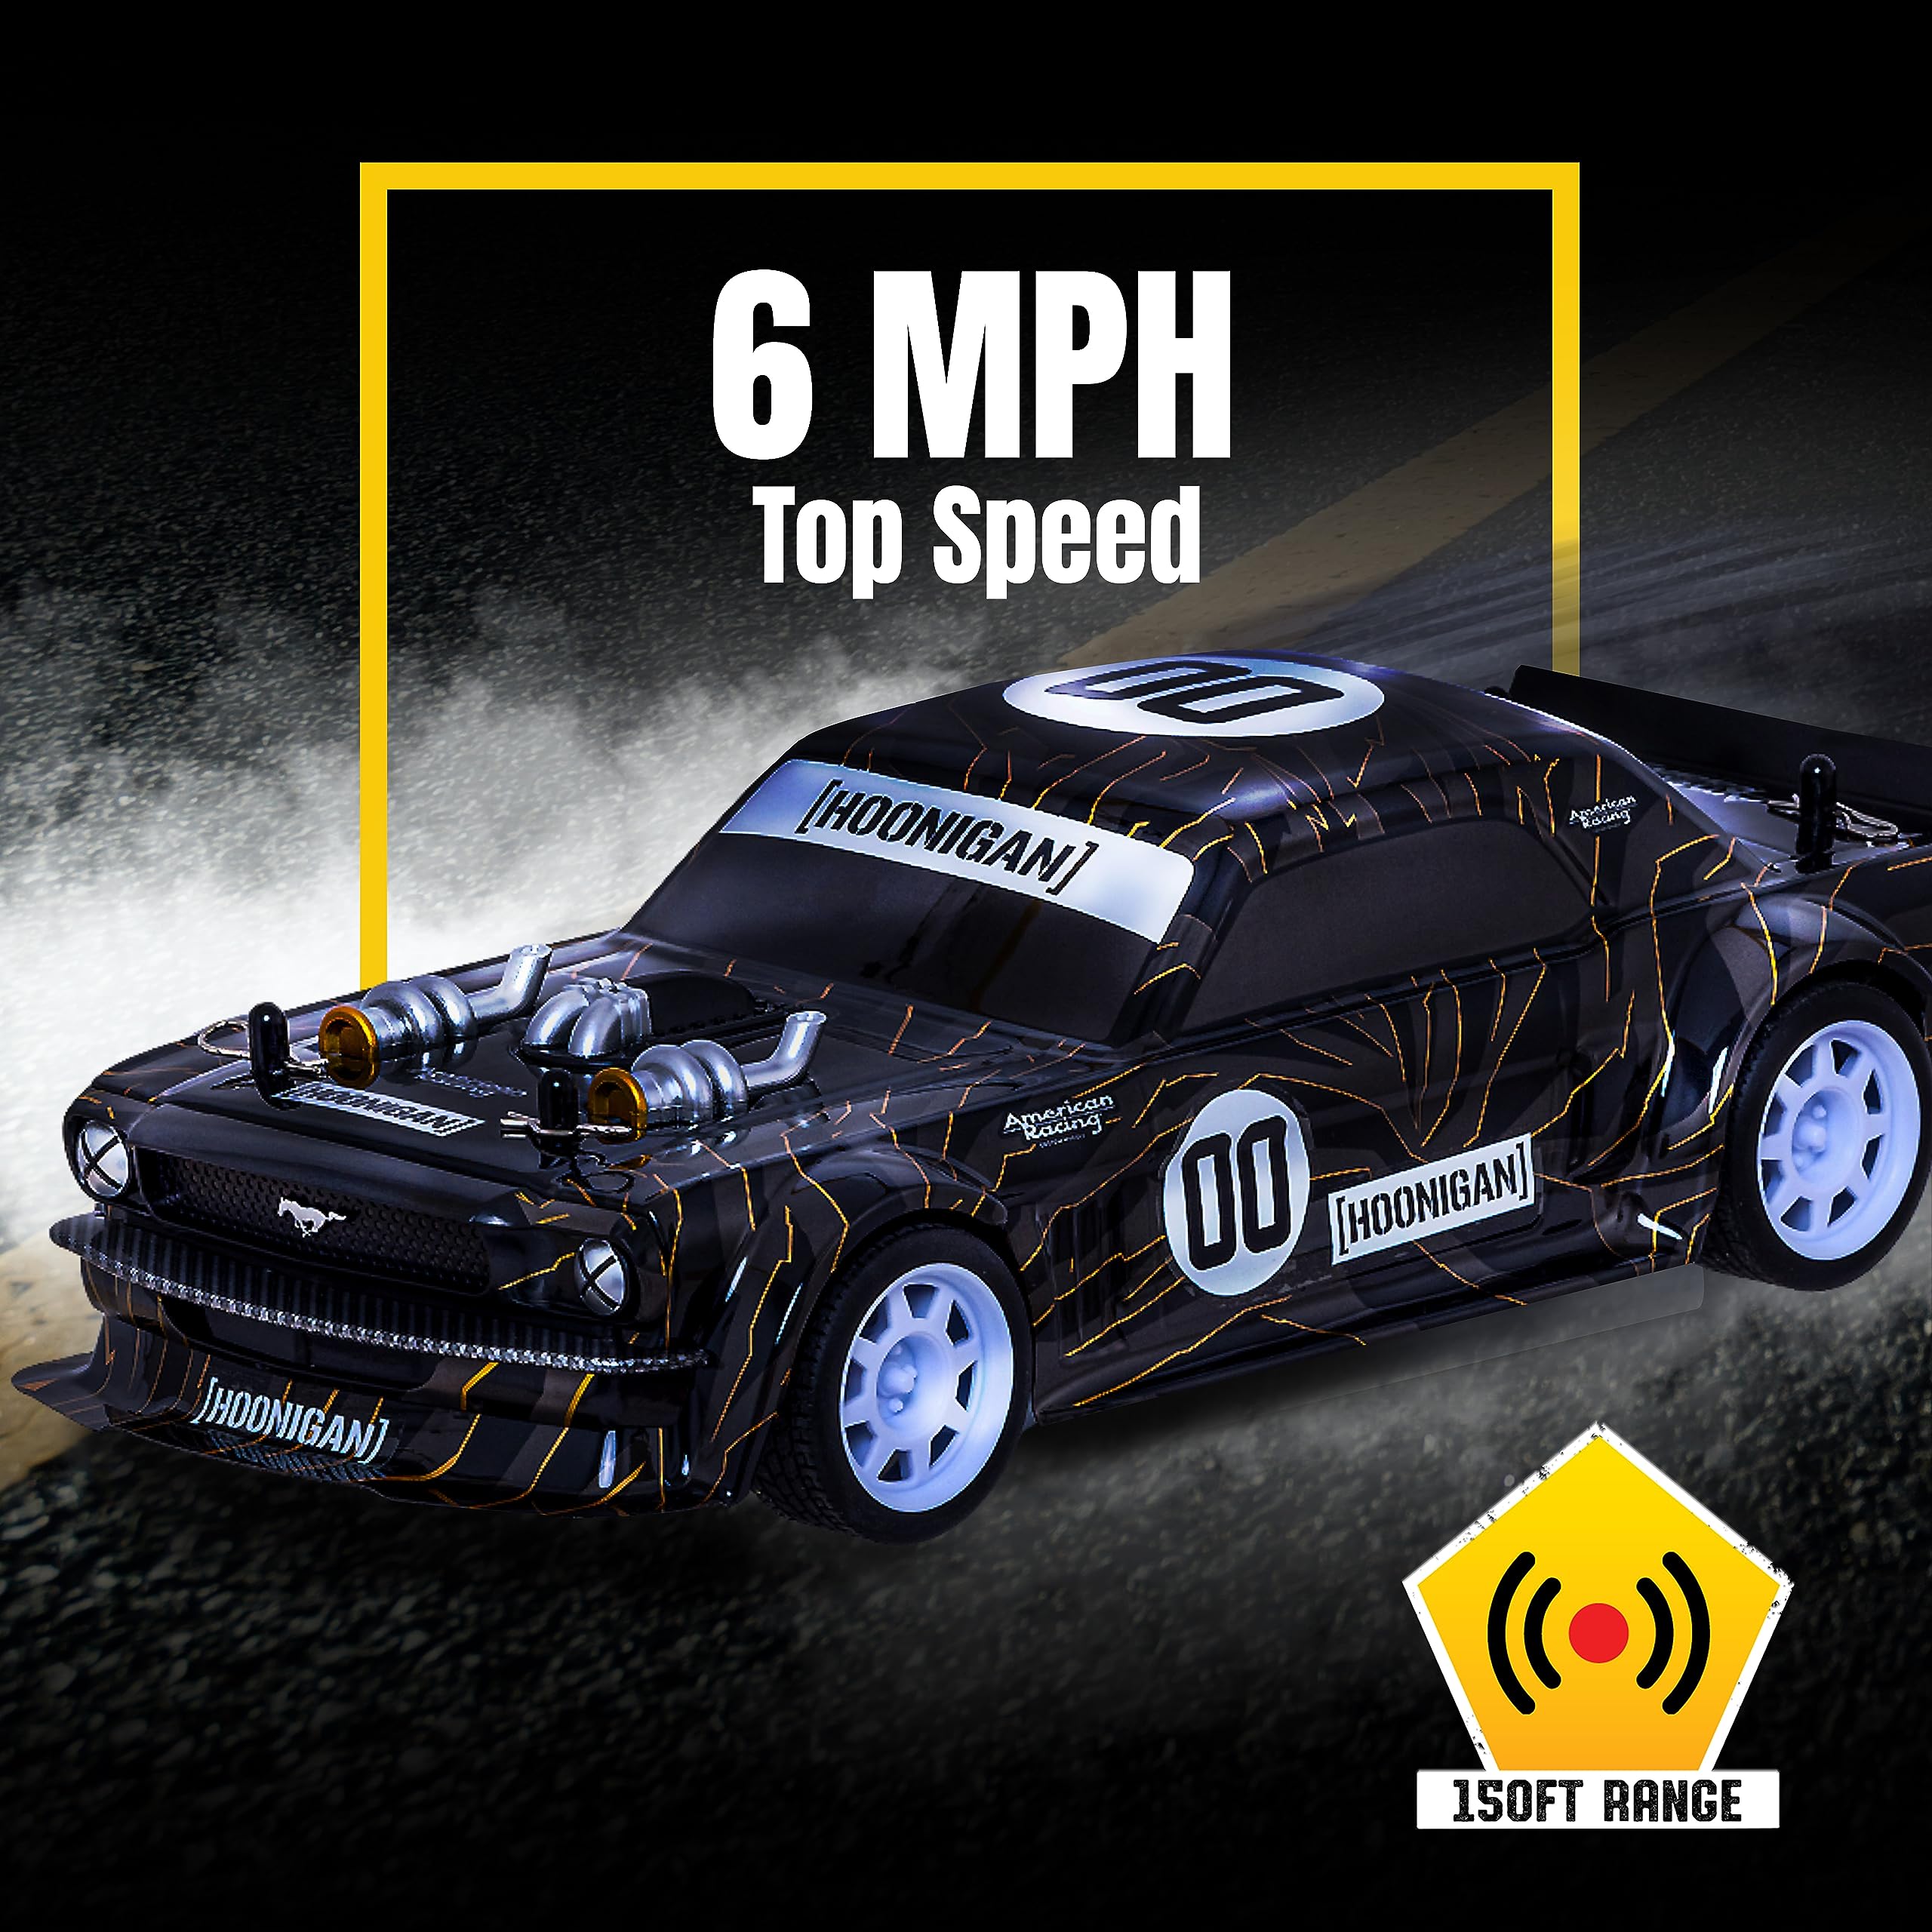 Flybar Hoonigan, Mustang Remote Control Car for Kids – RC Drift Car, RC Cars, Race Car, 3.7V, 2.4 GHz, Detailed Replica Design, USB Rechargeable Battery Included, 1:32 Scale, 100 ft Range, 4 Mph